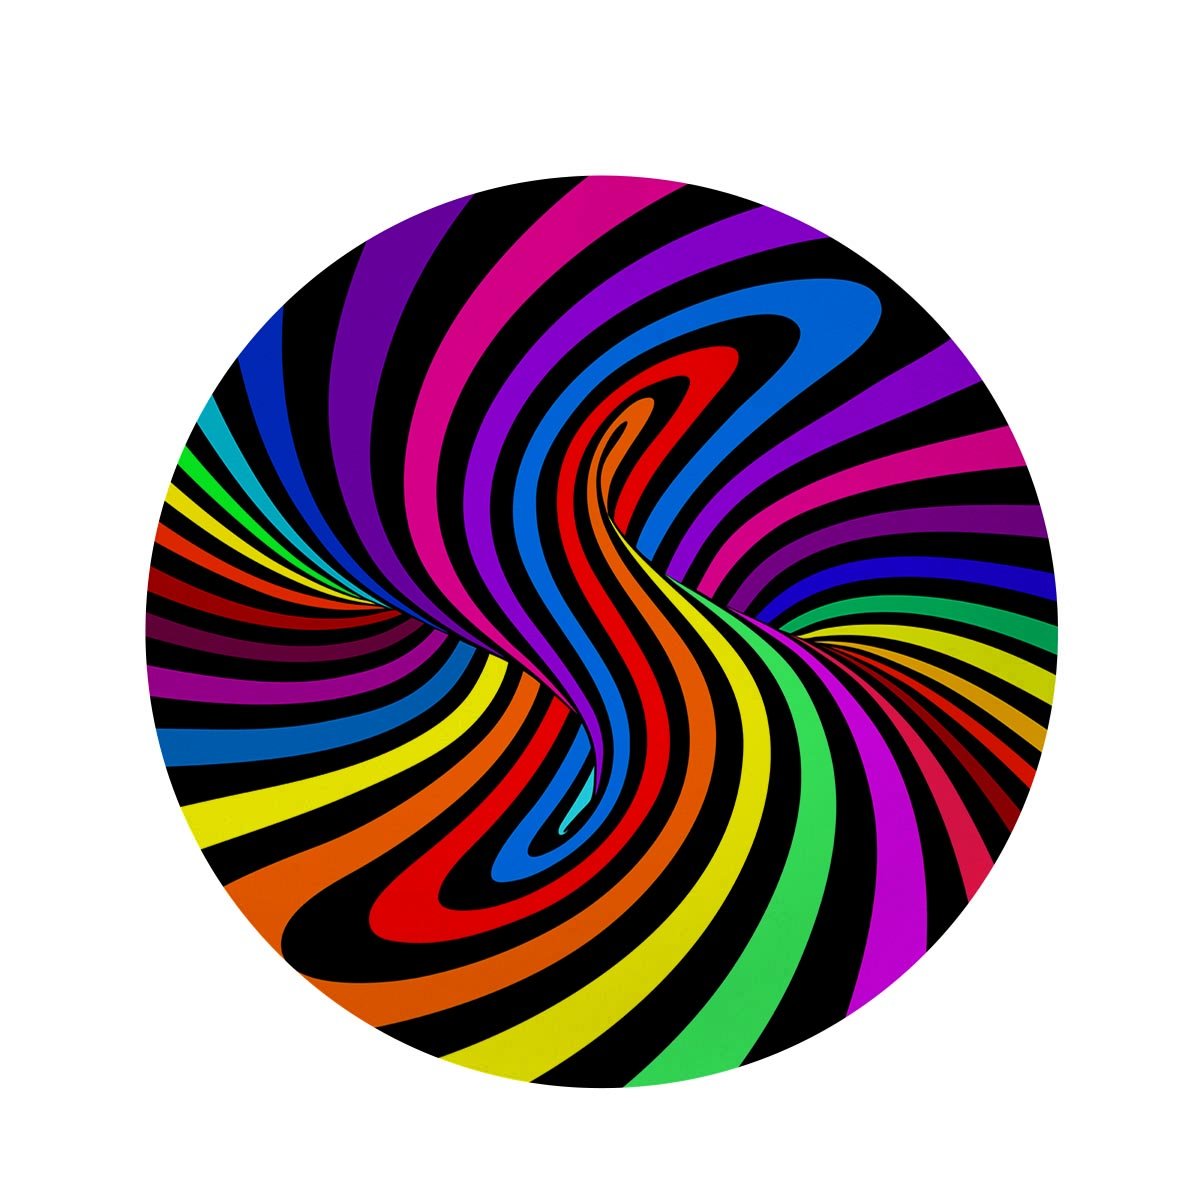 Abstract Colorful Psychedelic Round Rug-grizzshop